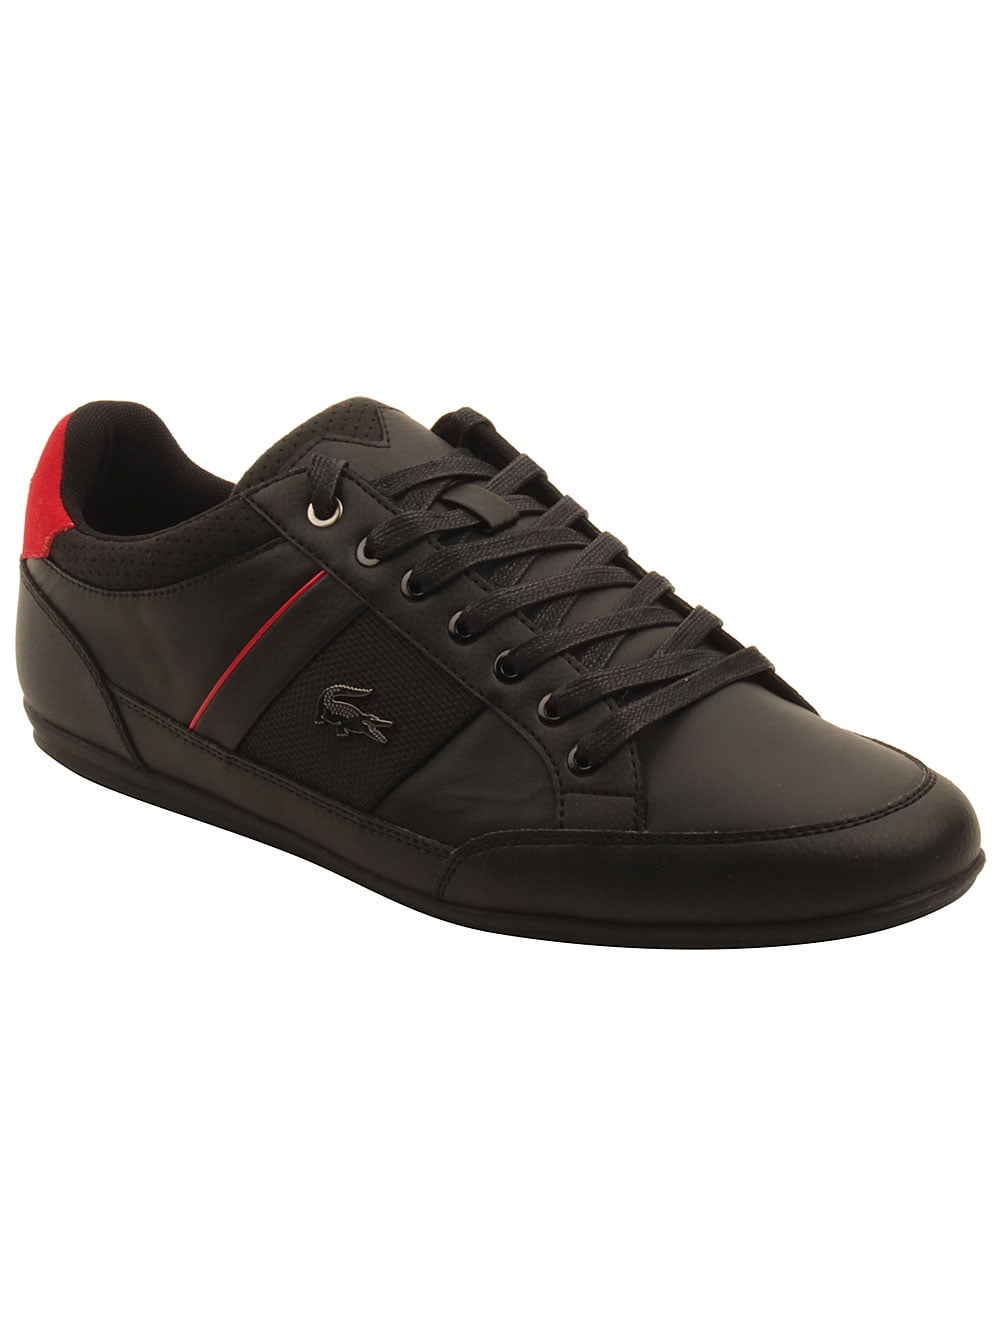 lacoste black and red shoes